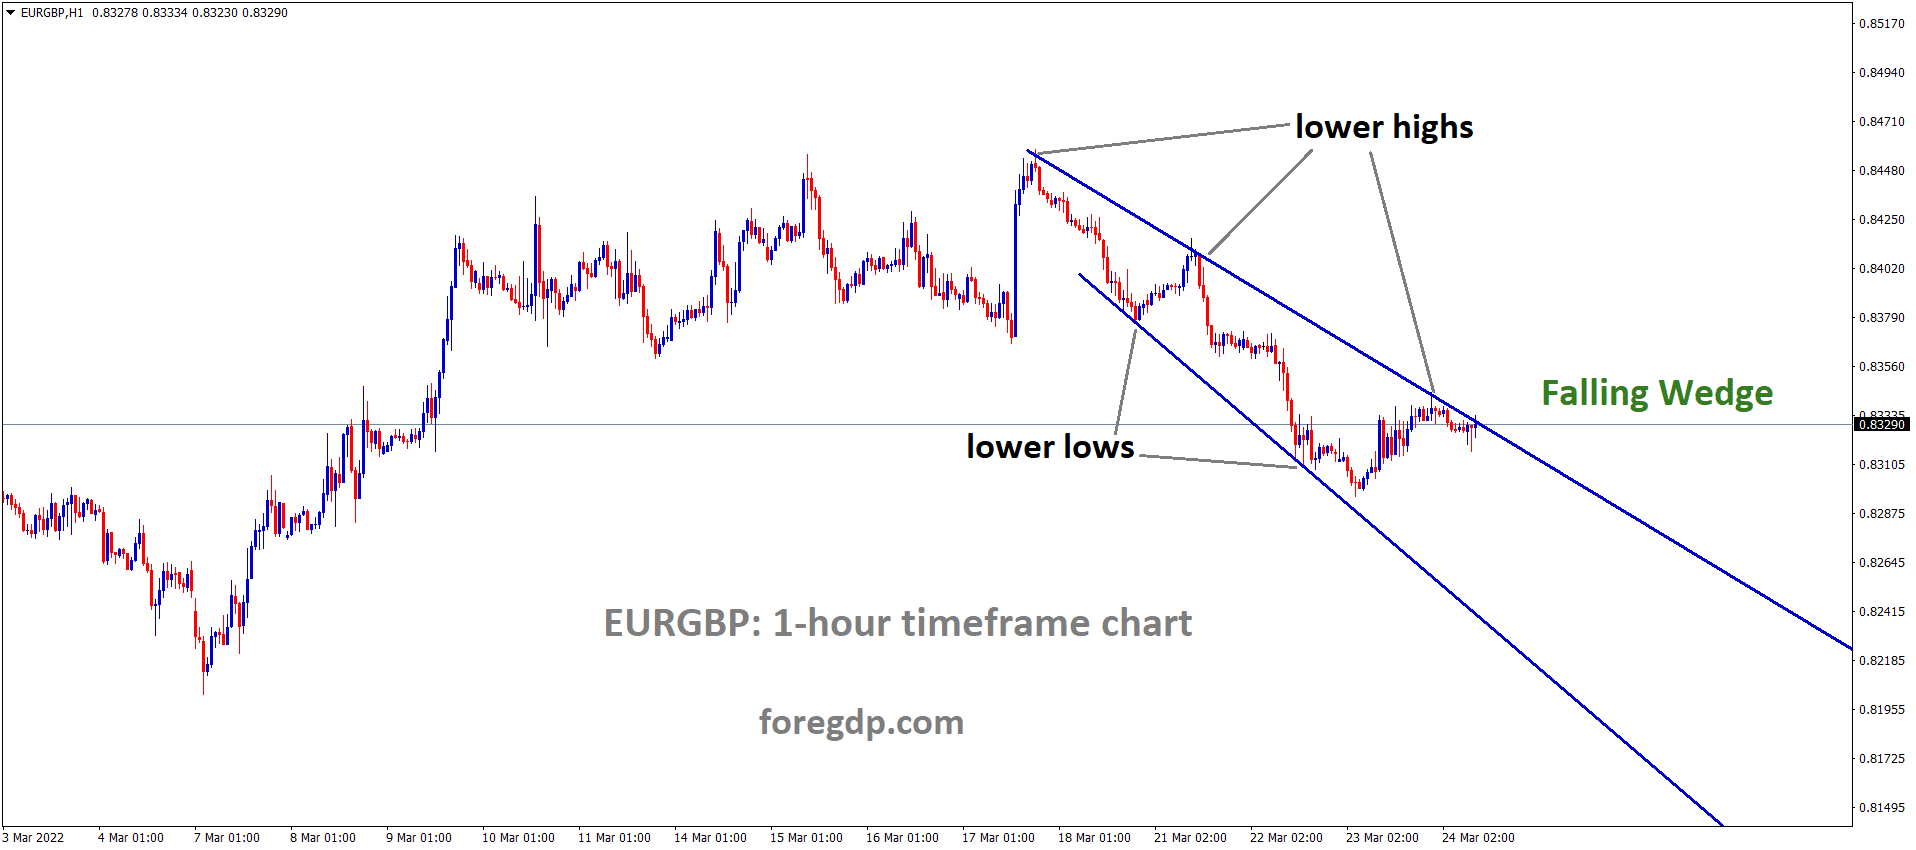 EURGBP H1 Market has reached the lower high area of the Falling Wedge Pattern.